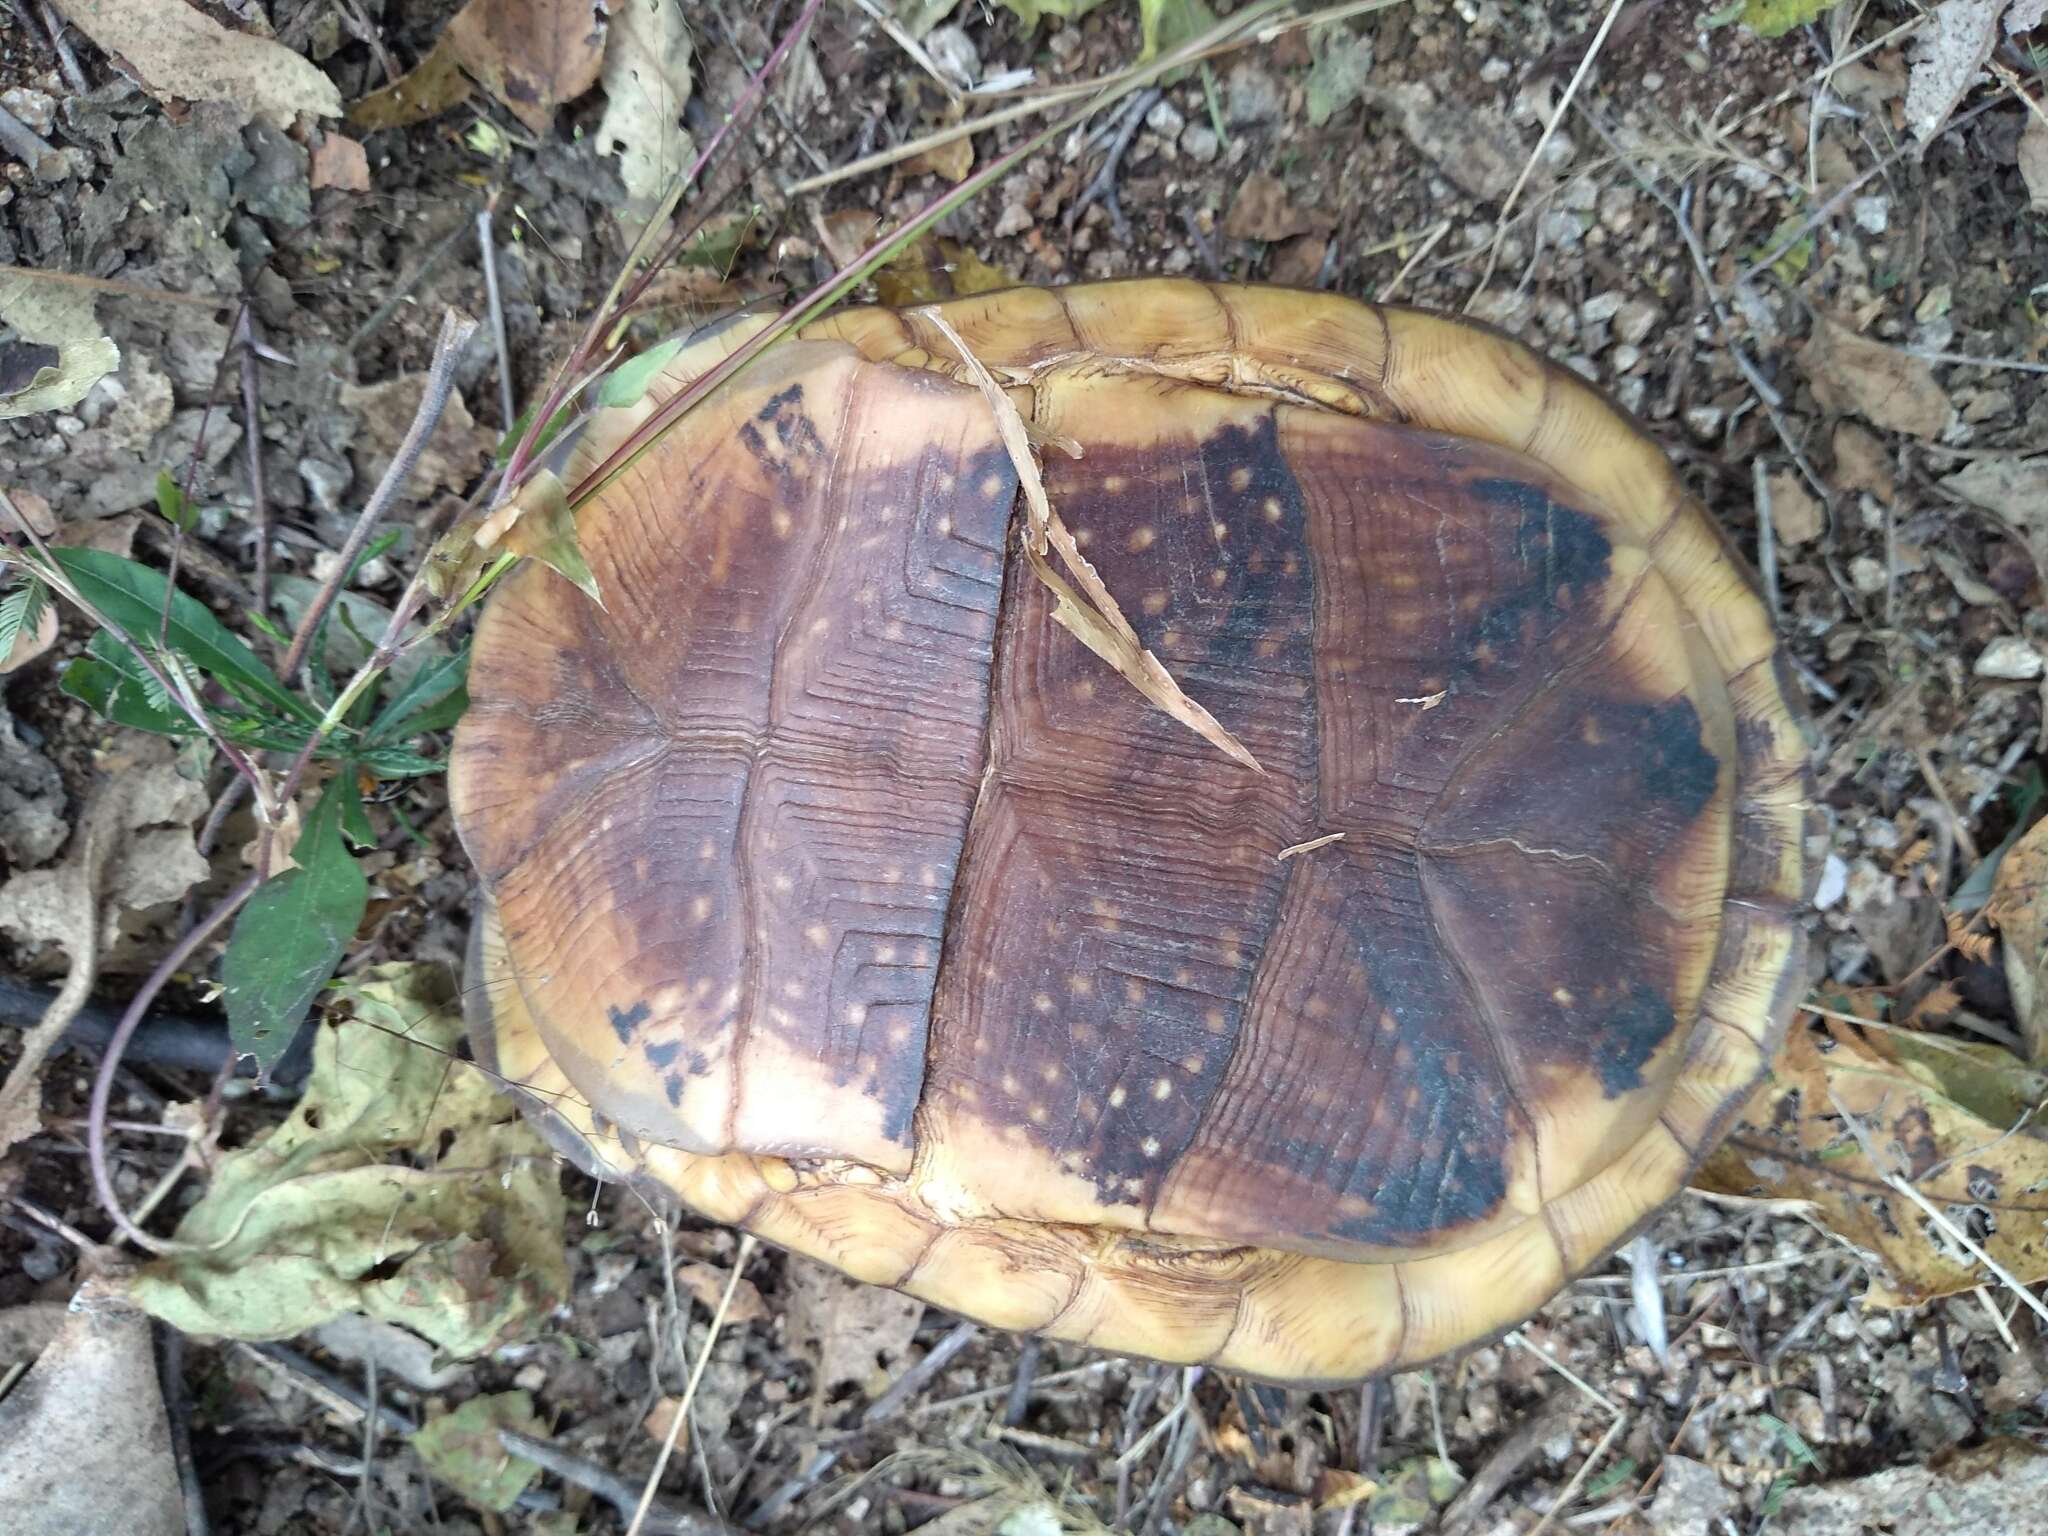 Image of Northern Spotted Box Turtle